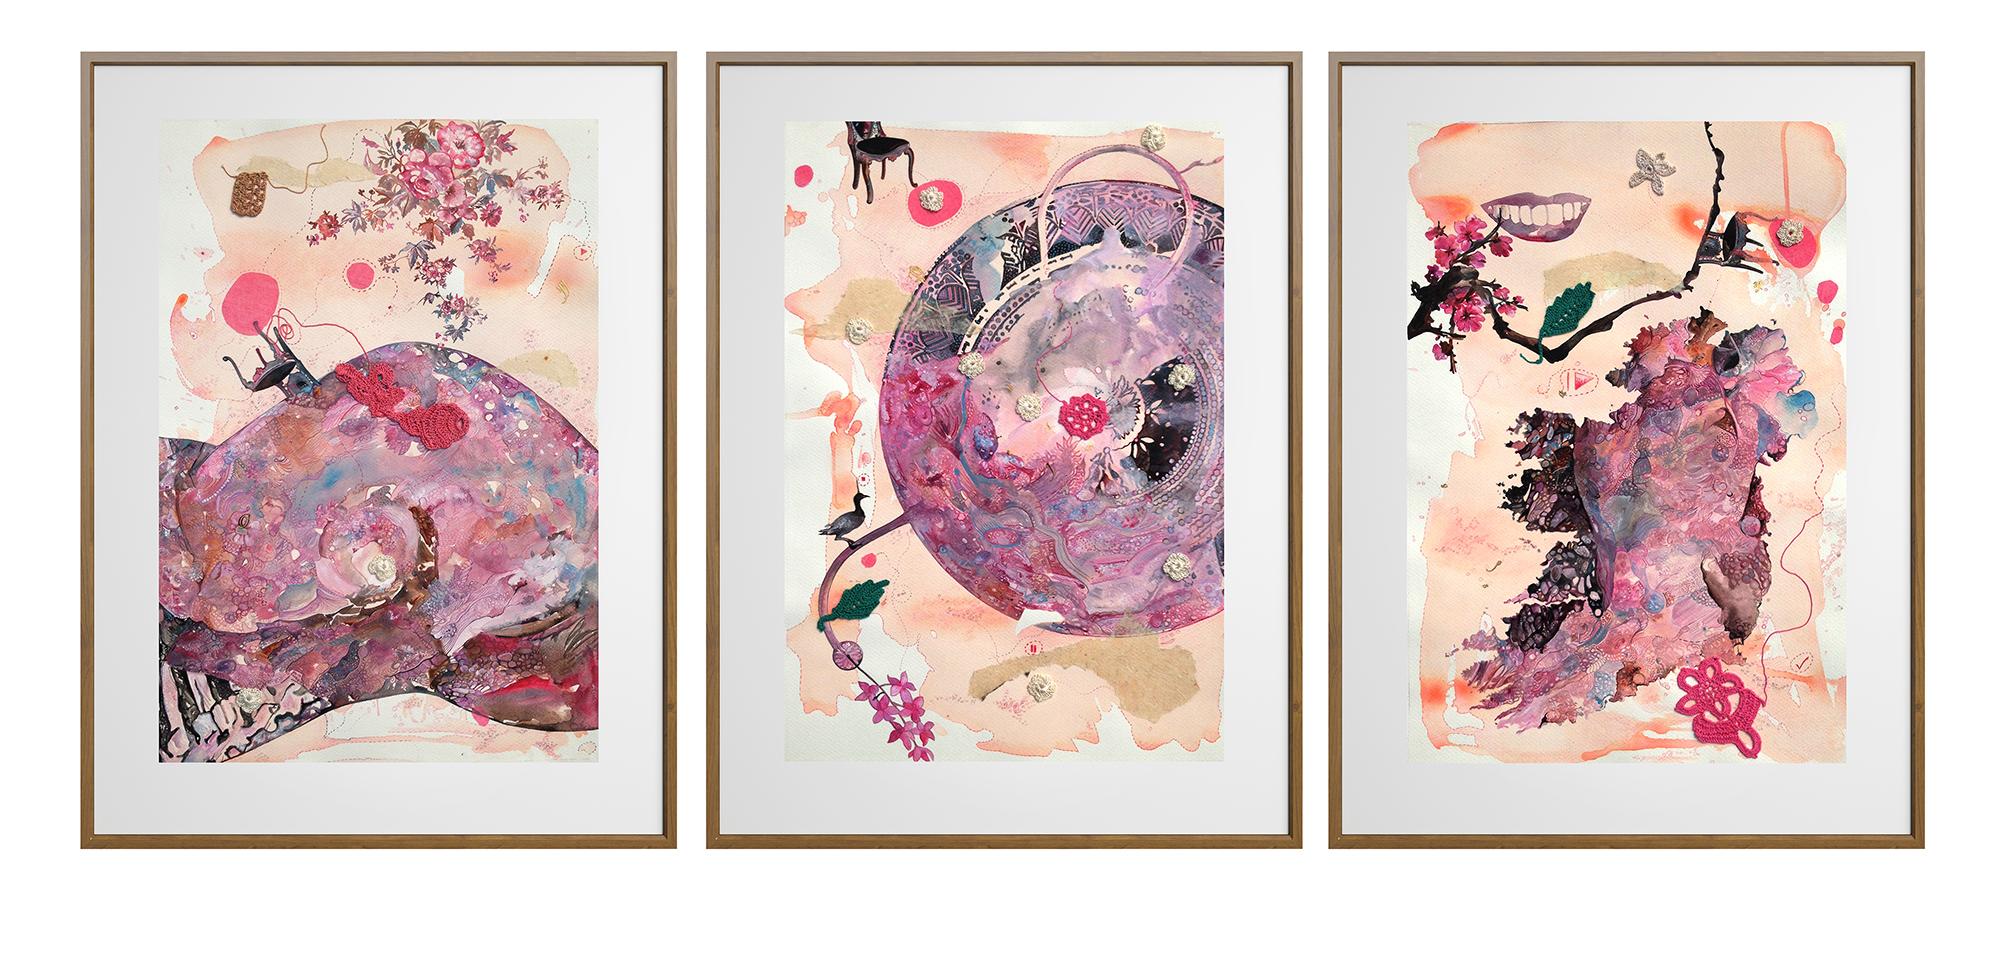 Ritu Sinha Figurative Painting - "My Body, My Soul" - Gorgeous Triptych by Indian Artist - Framed in Light Wood